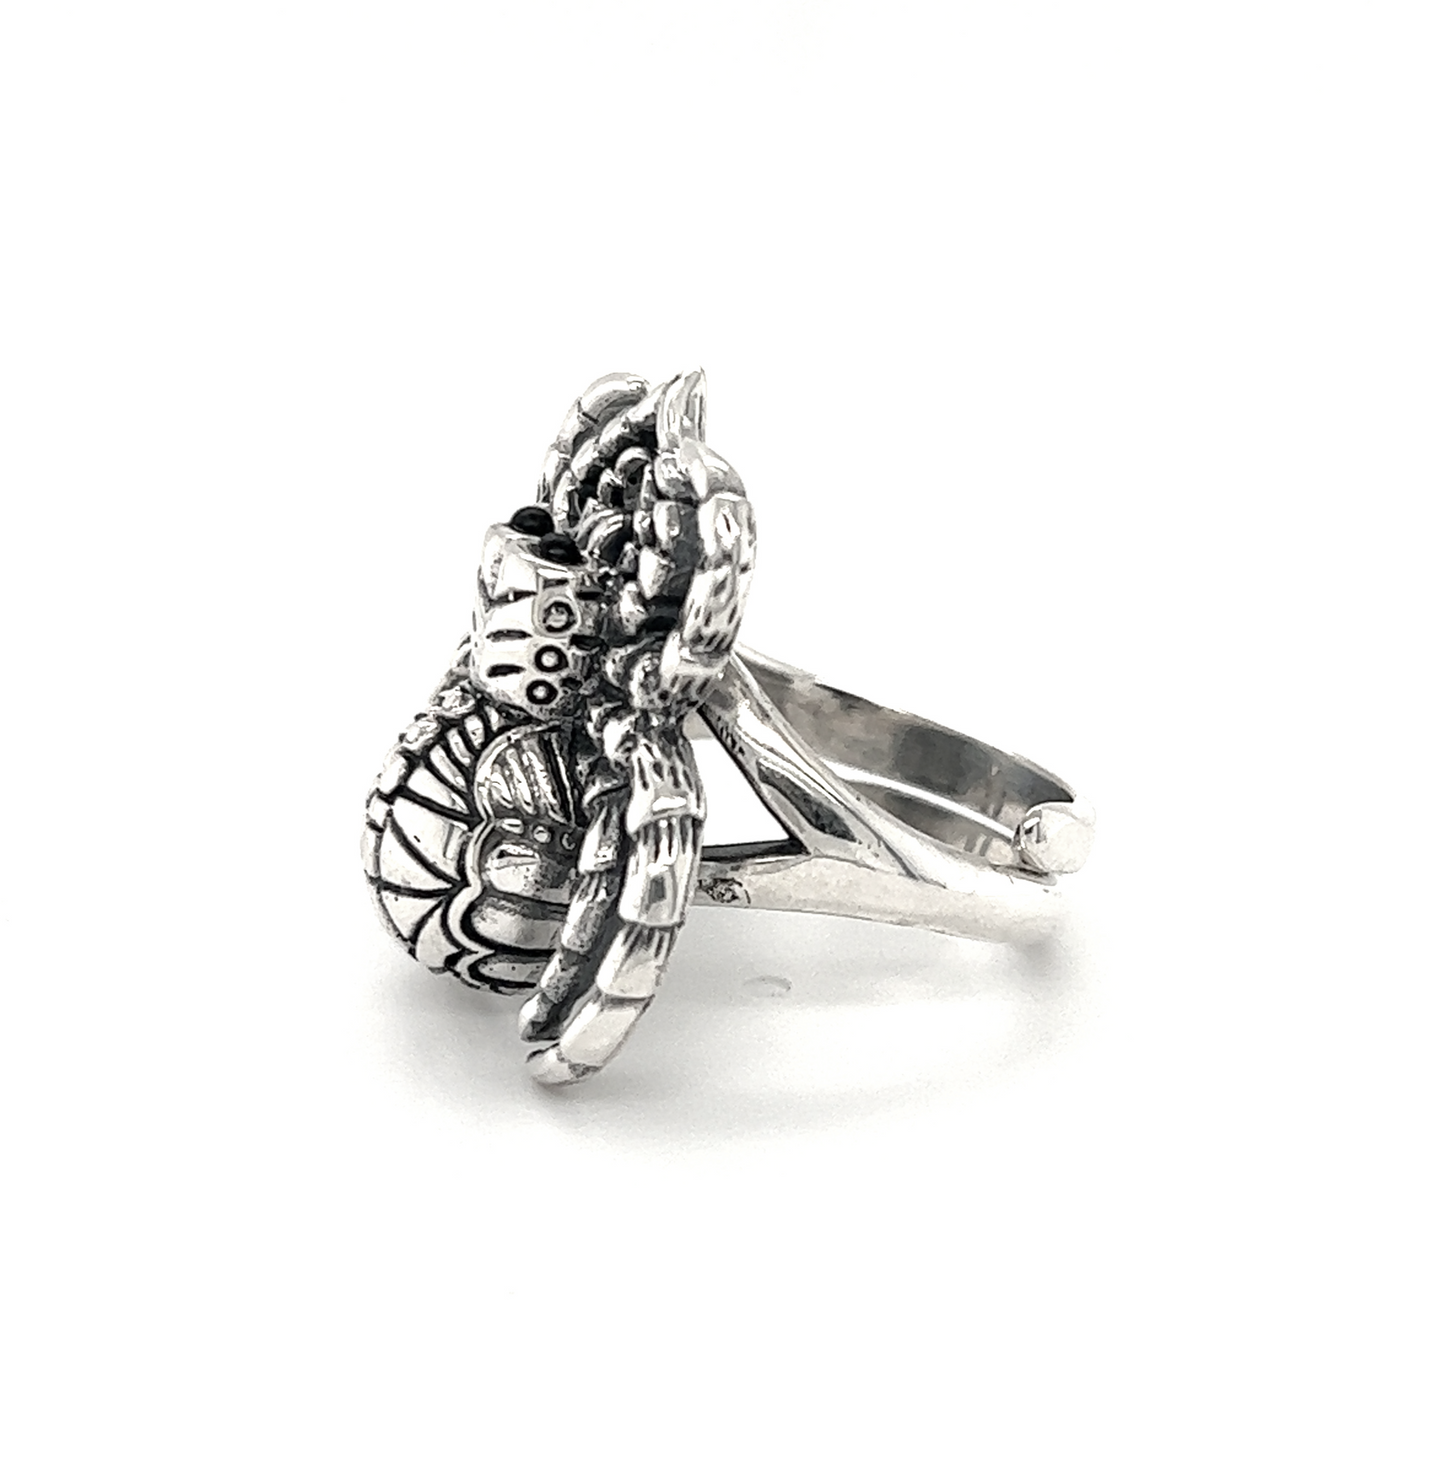 An adjustable silver Statement Spider Ring with a flower on it, made of .925 Sterling Silver.